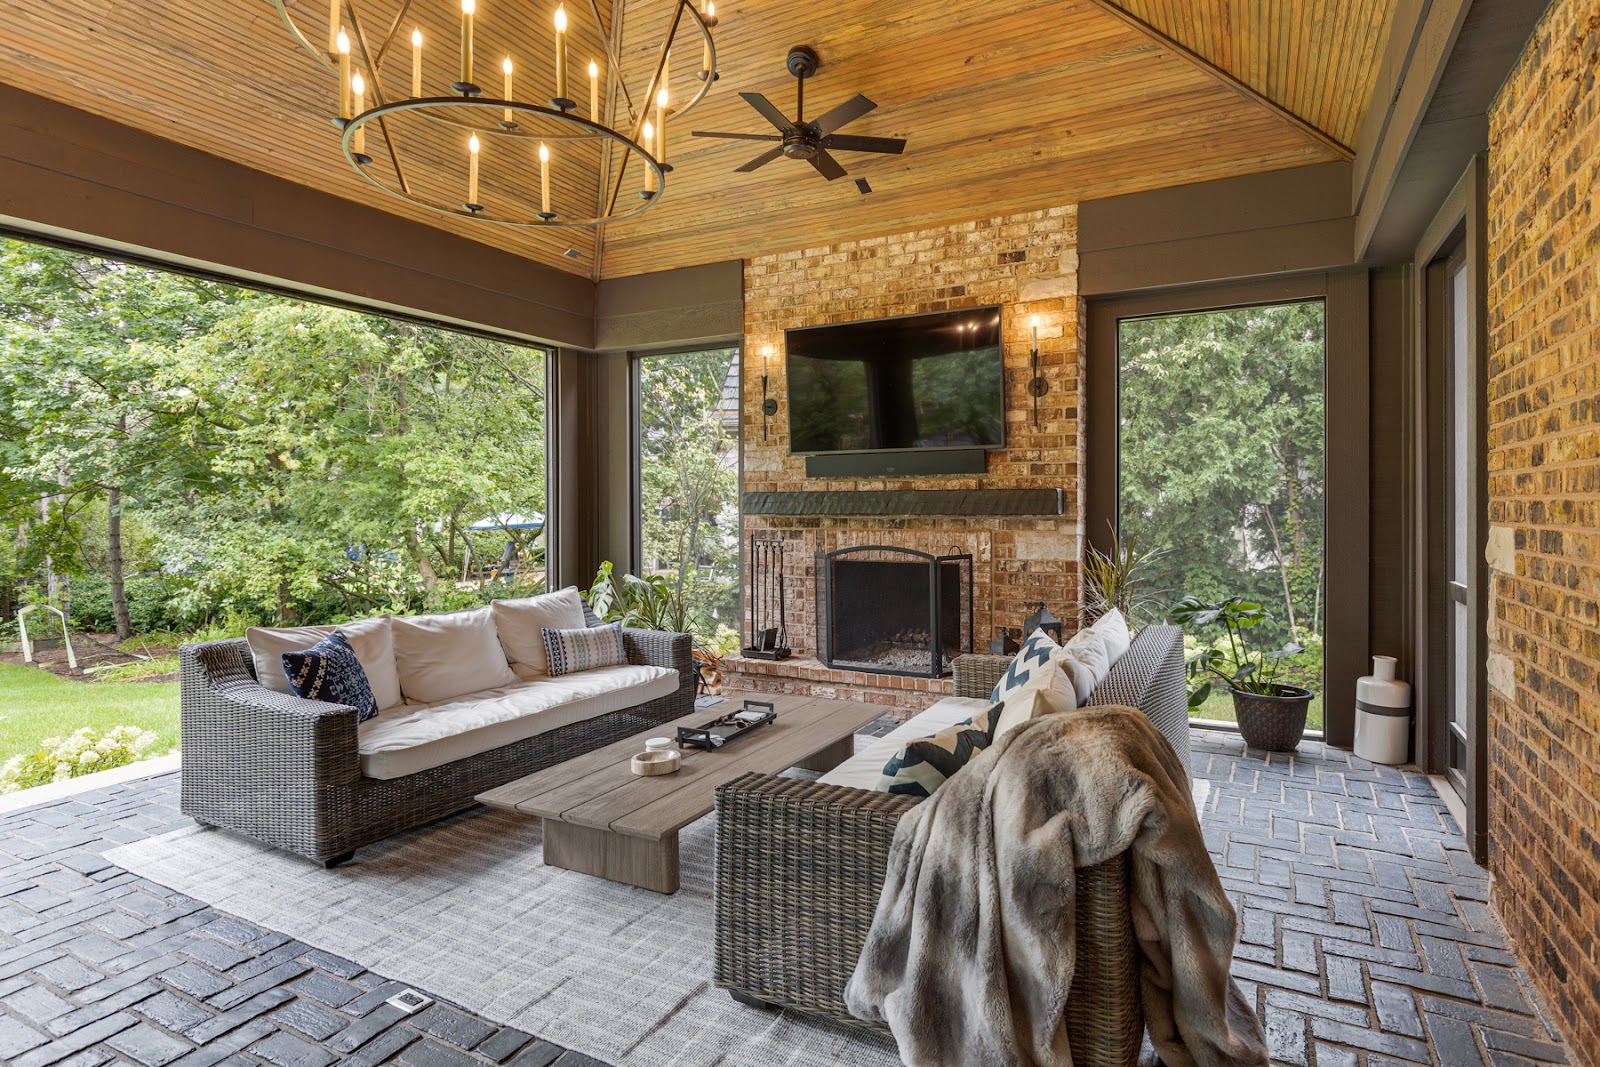 Three season room with outdoor views, a brick fireplace, wood paneled ceiling and paver flooring.